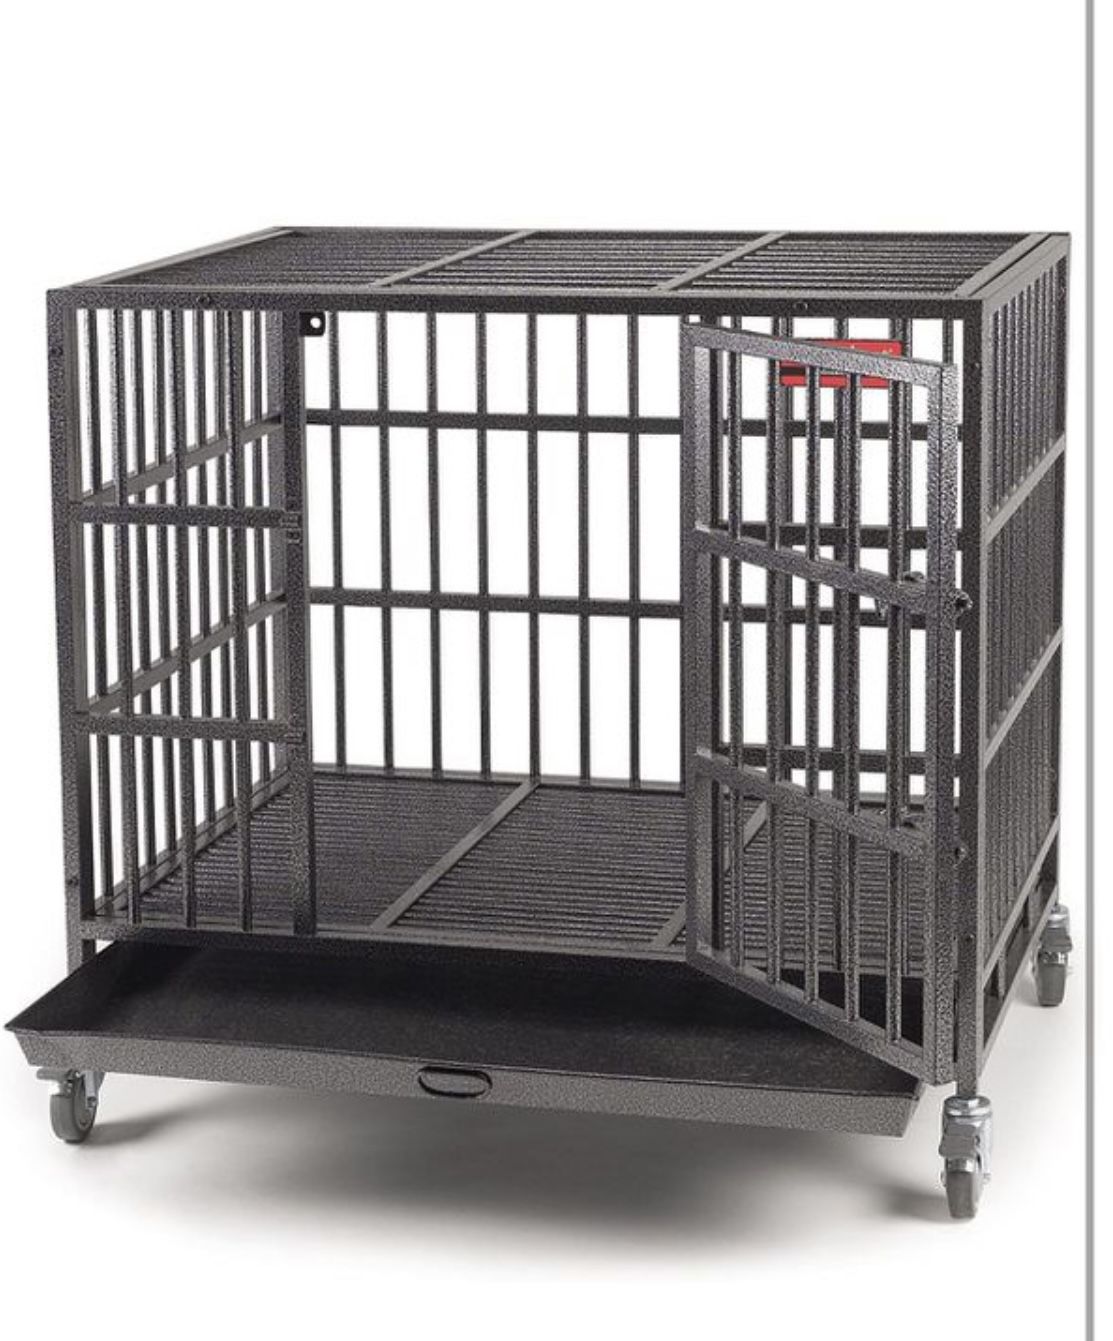 X large dog kennel cage